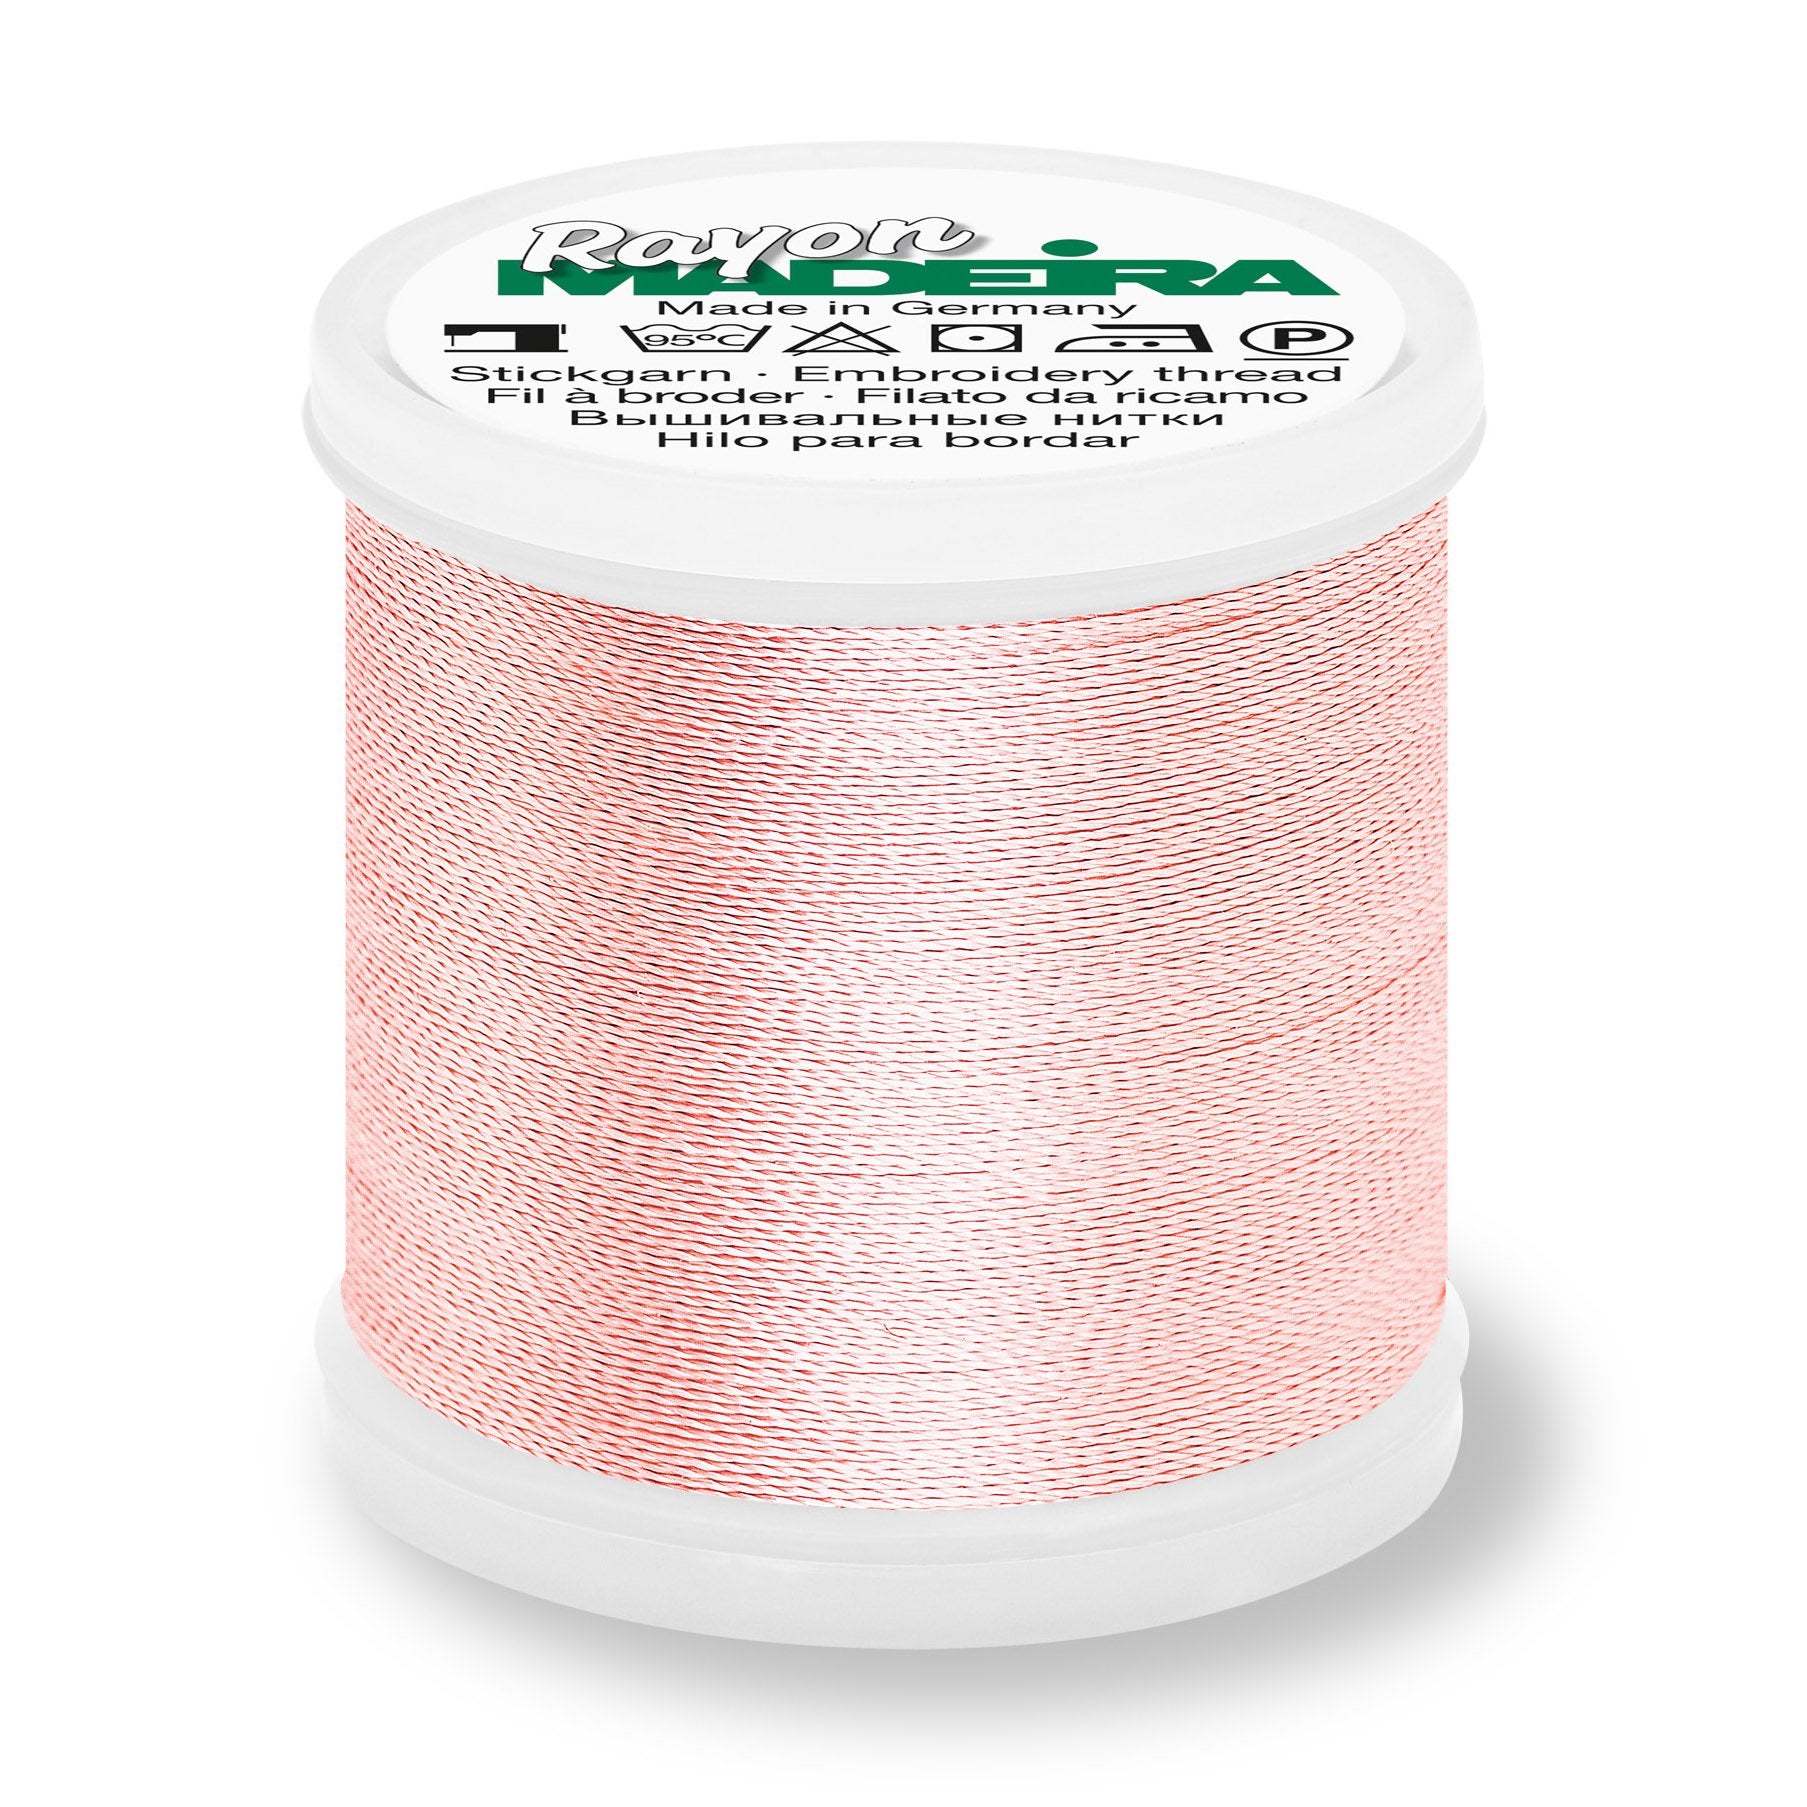 Madeira Rayon 40 Embroidery Thread 200m #1019 Peach from Jaycotts Sewing Supplies